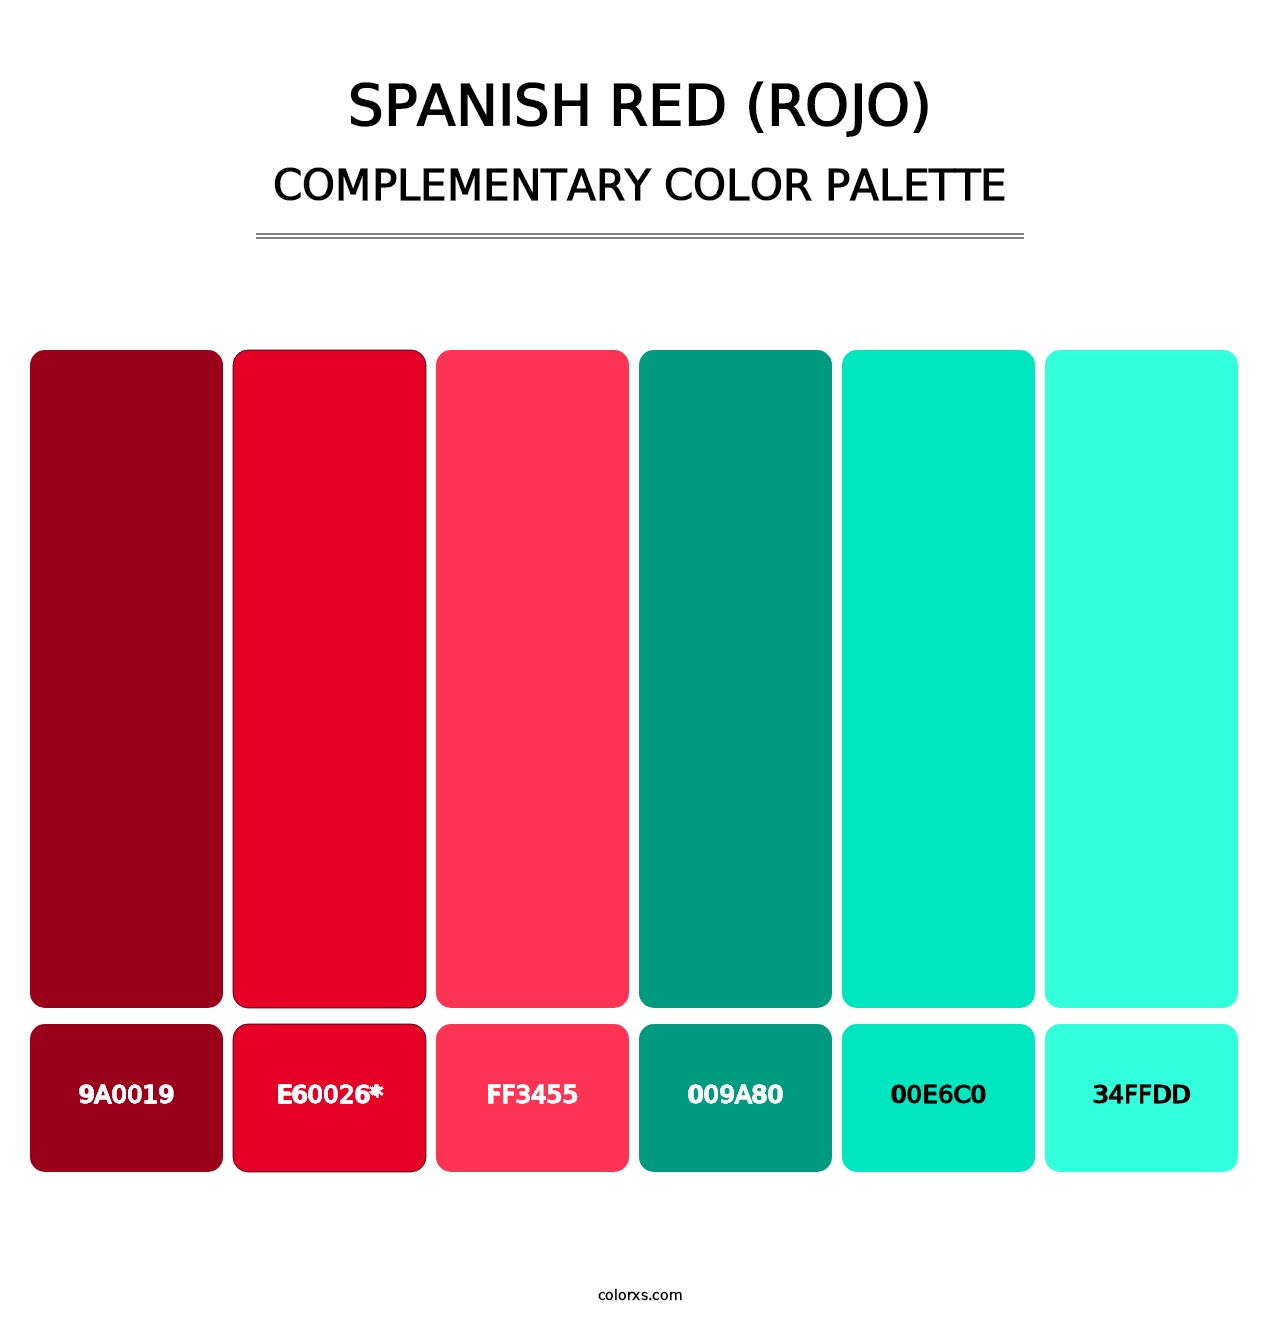 Spanish Red (Rojo) - Complementary Color Palette